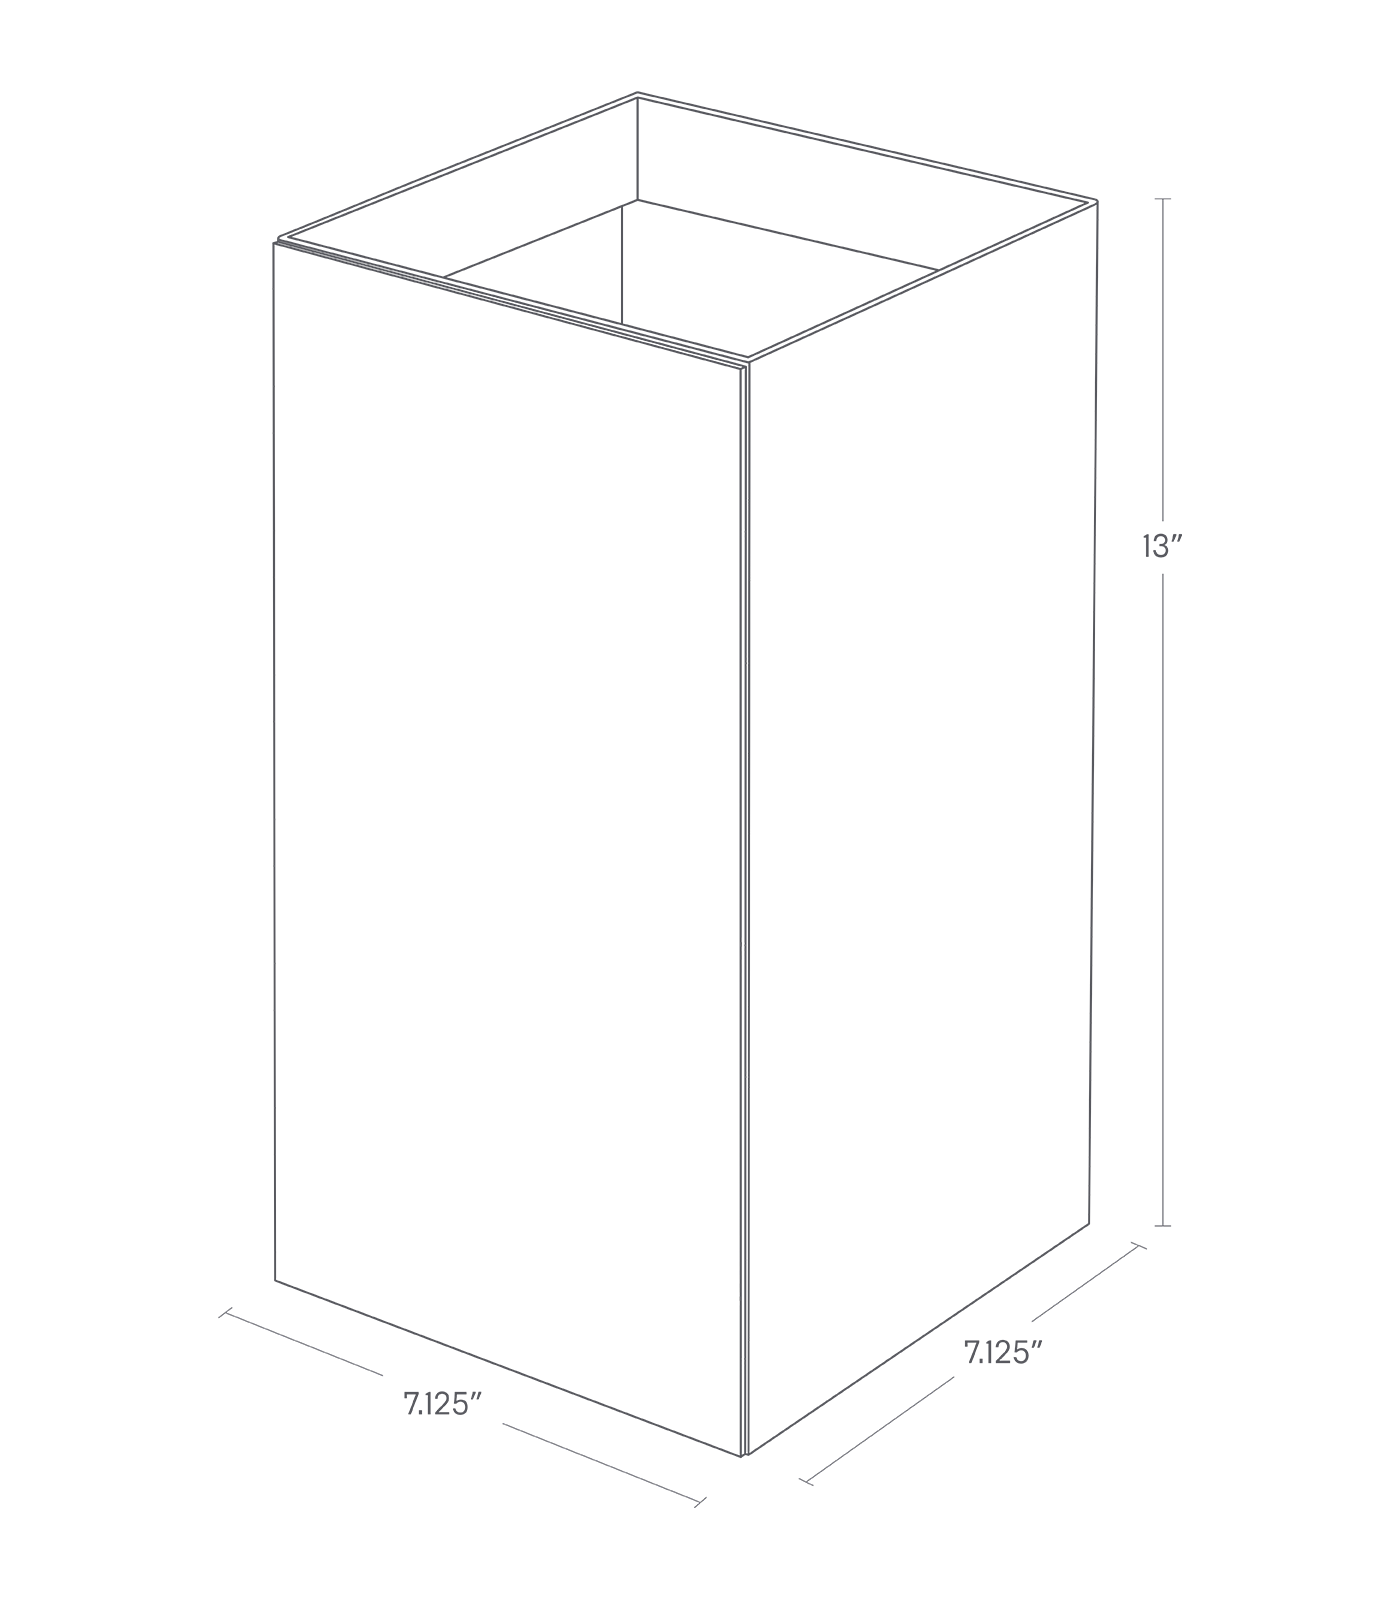 Dimension image for Trash Can - Two Styles on a white background including dimensions  L 7.09 x W 7.09 x H 12.99 inches